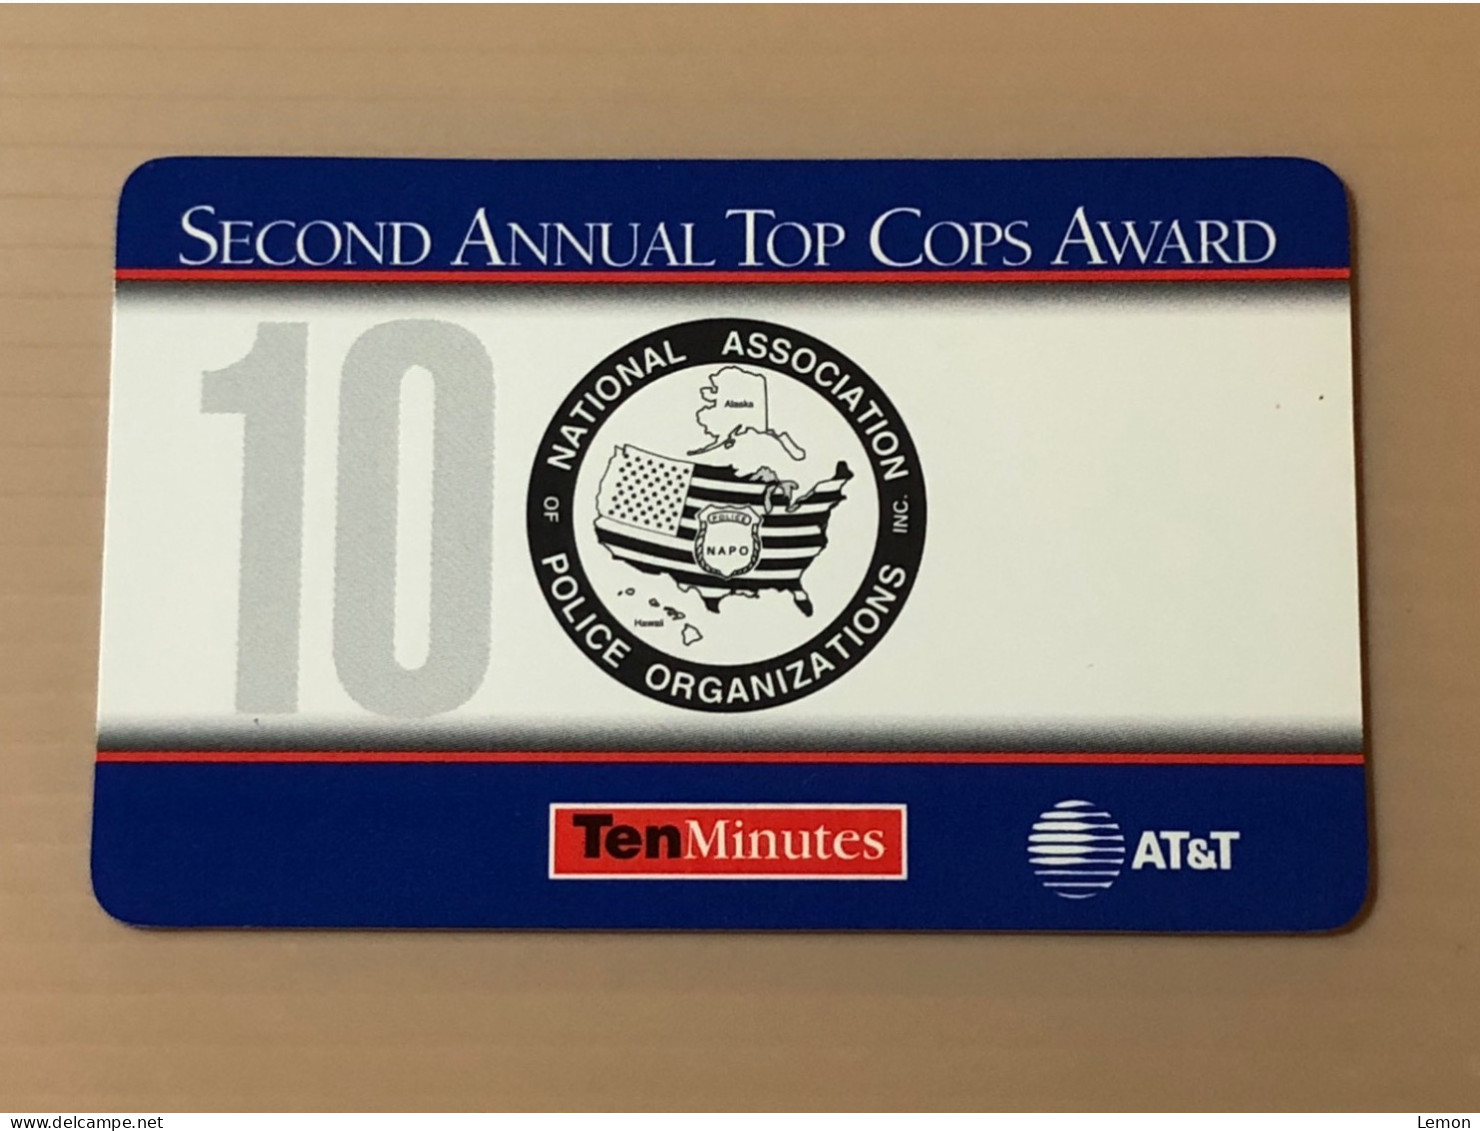 Mint USA UNITED STATES America Prepaid Telecard Phonecard, AT&T Annual Top Cops Award SAMPLE CARD, Set Of 1 Mint Card - Colecciones